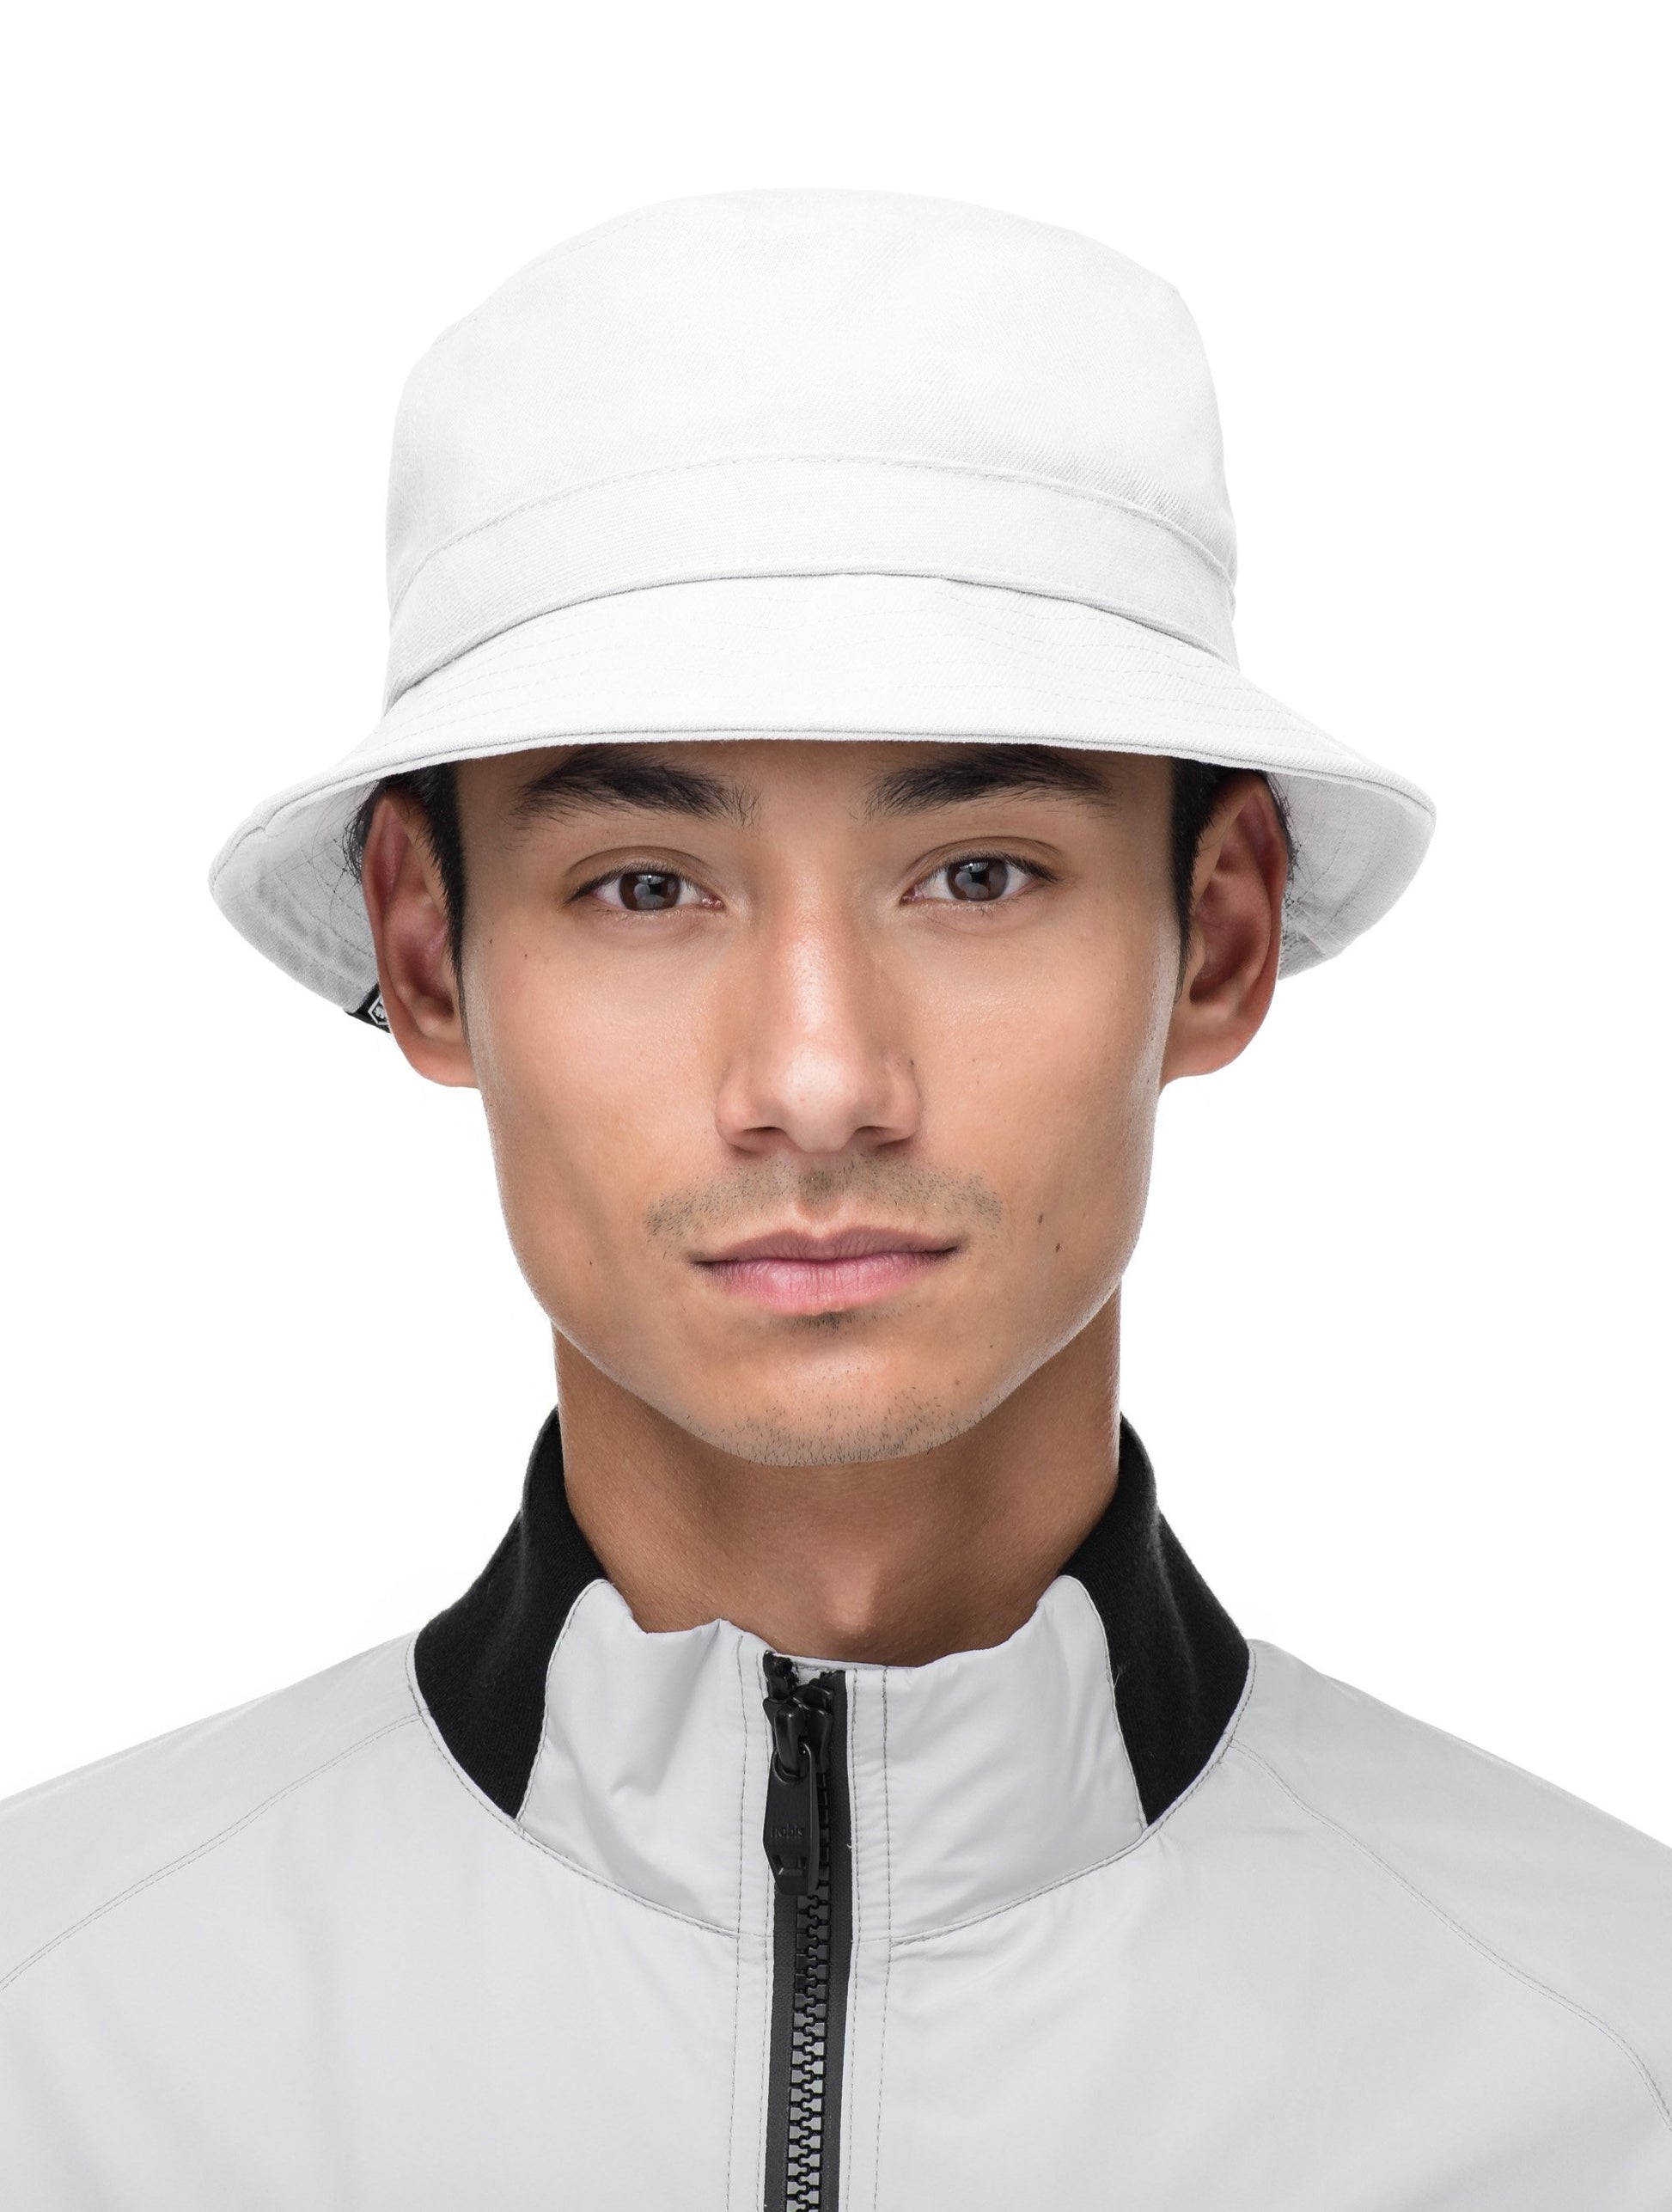 Oasis Classic Flat Top Bucket Hat / Optic White / One Size